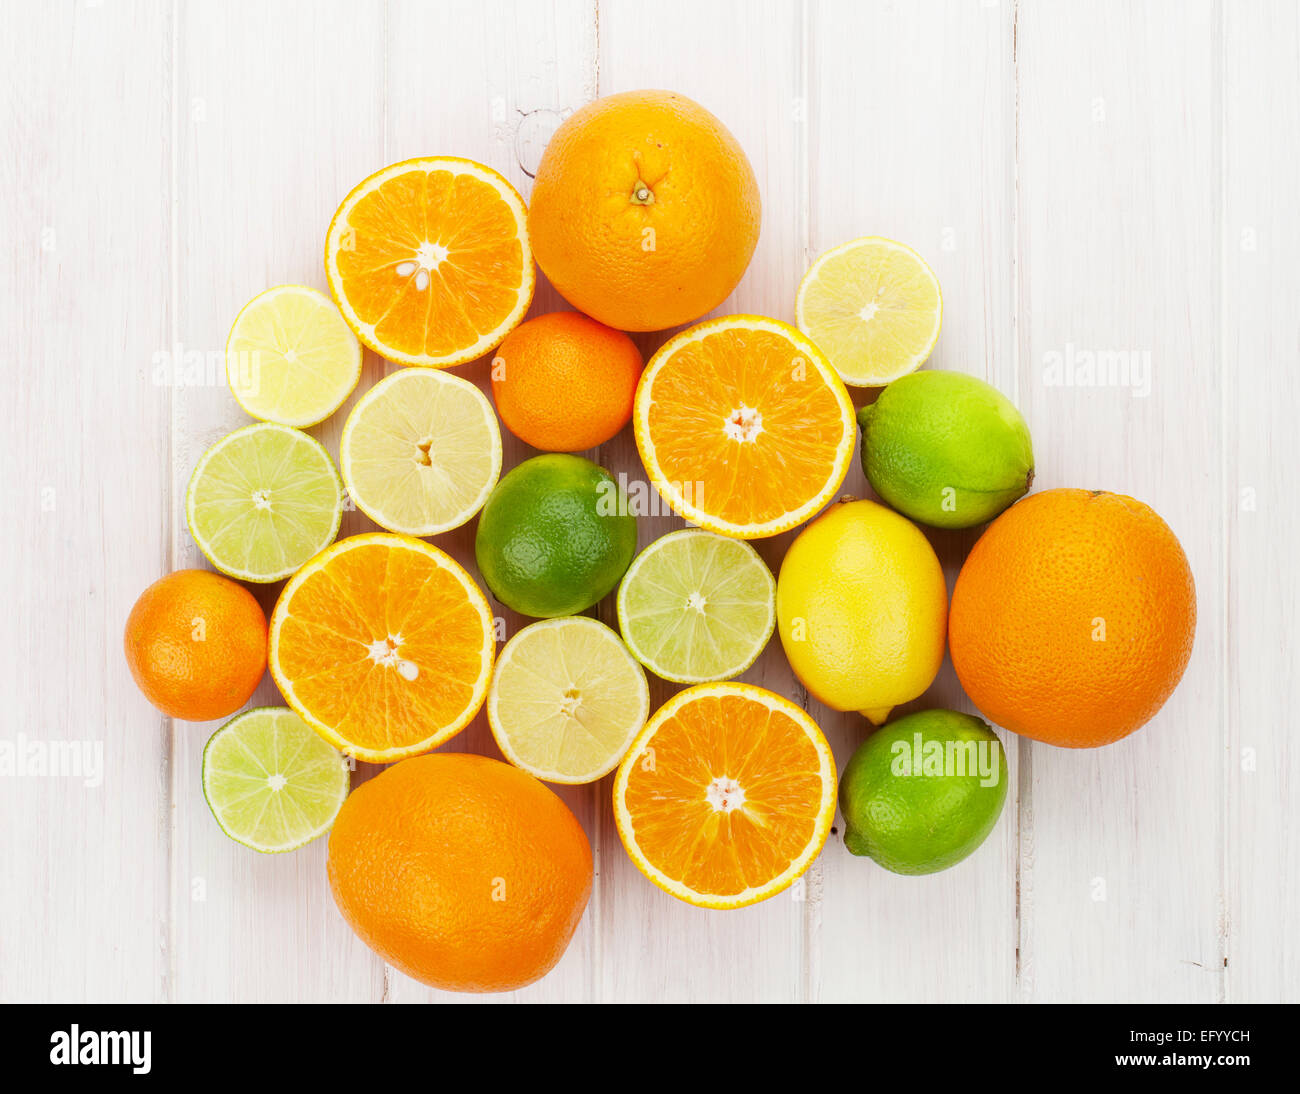 Citrus fruits. Oranges, limes and lemons. Over wooden table background Stock Photo